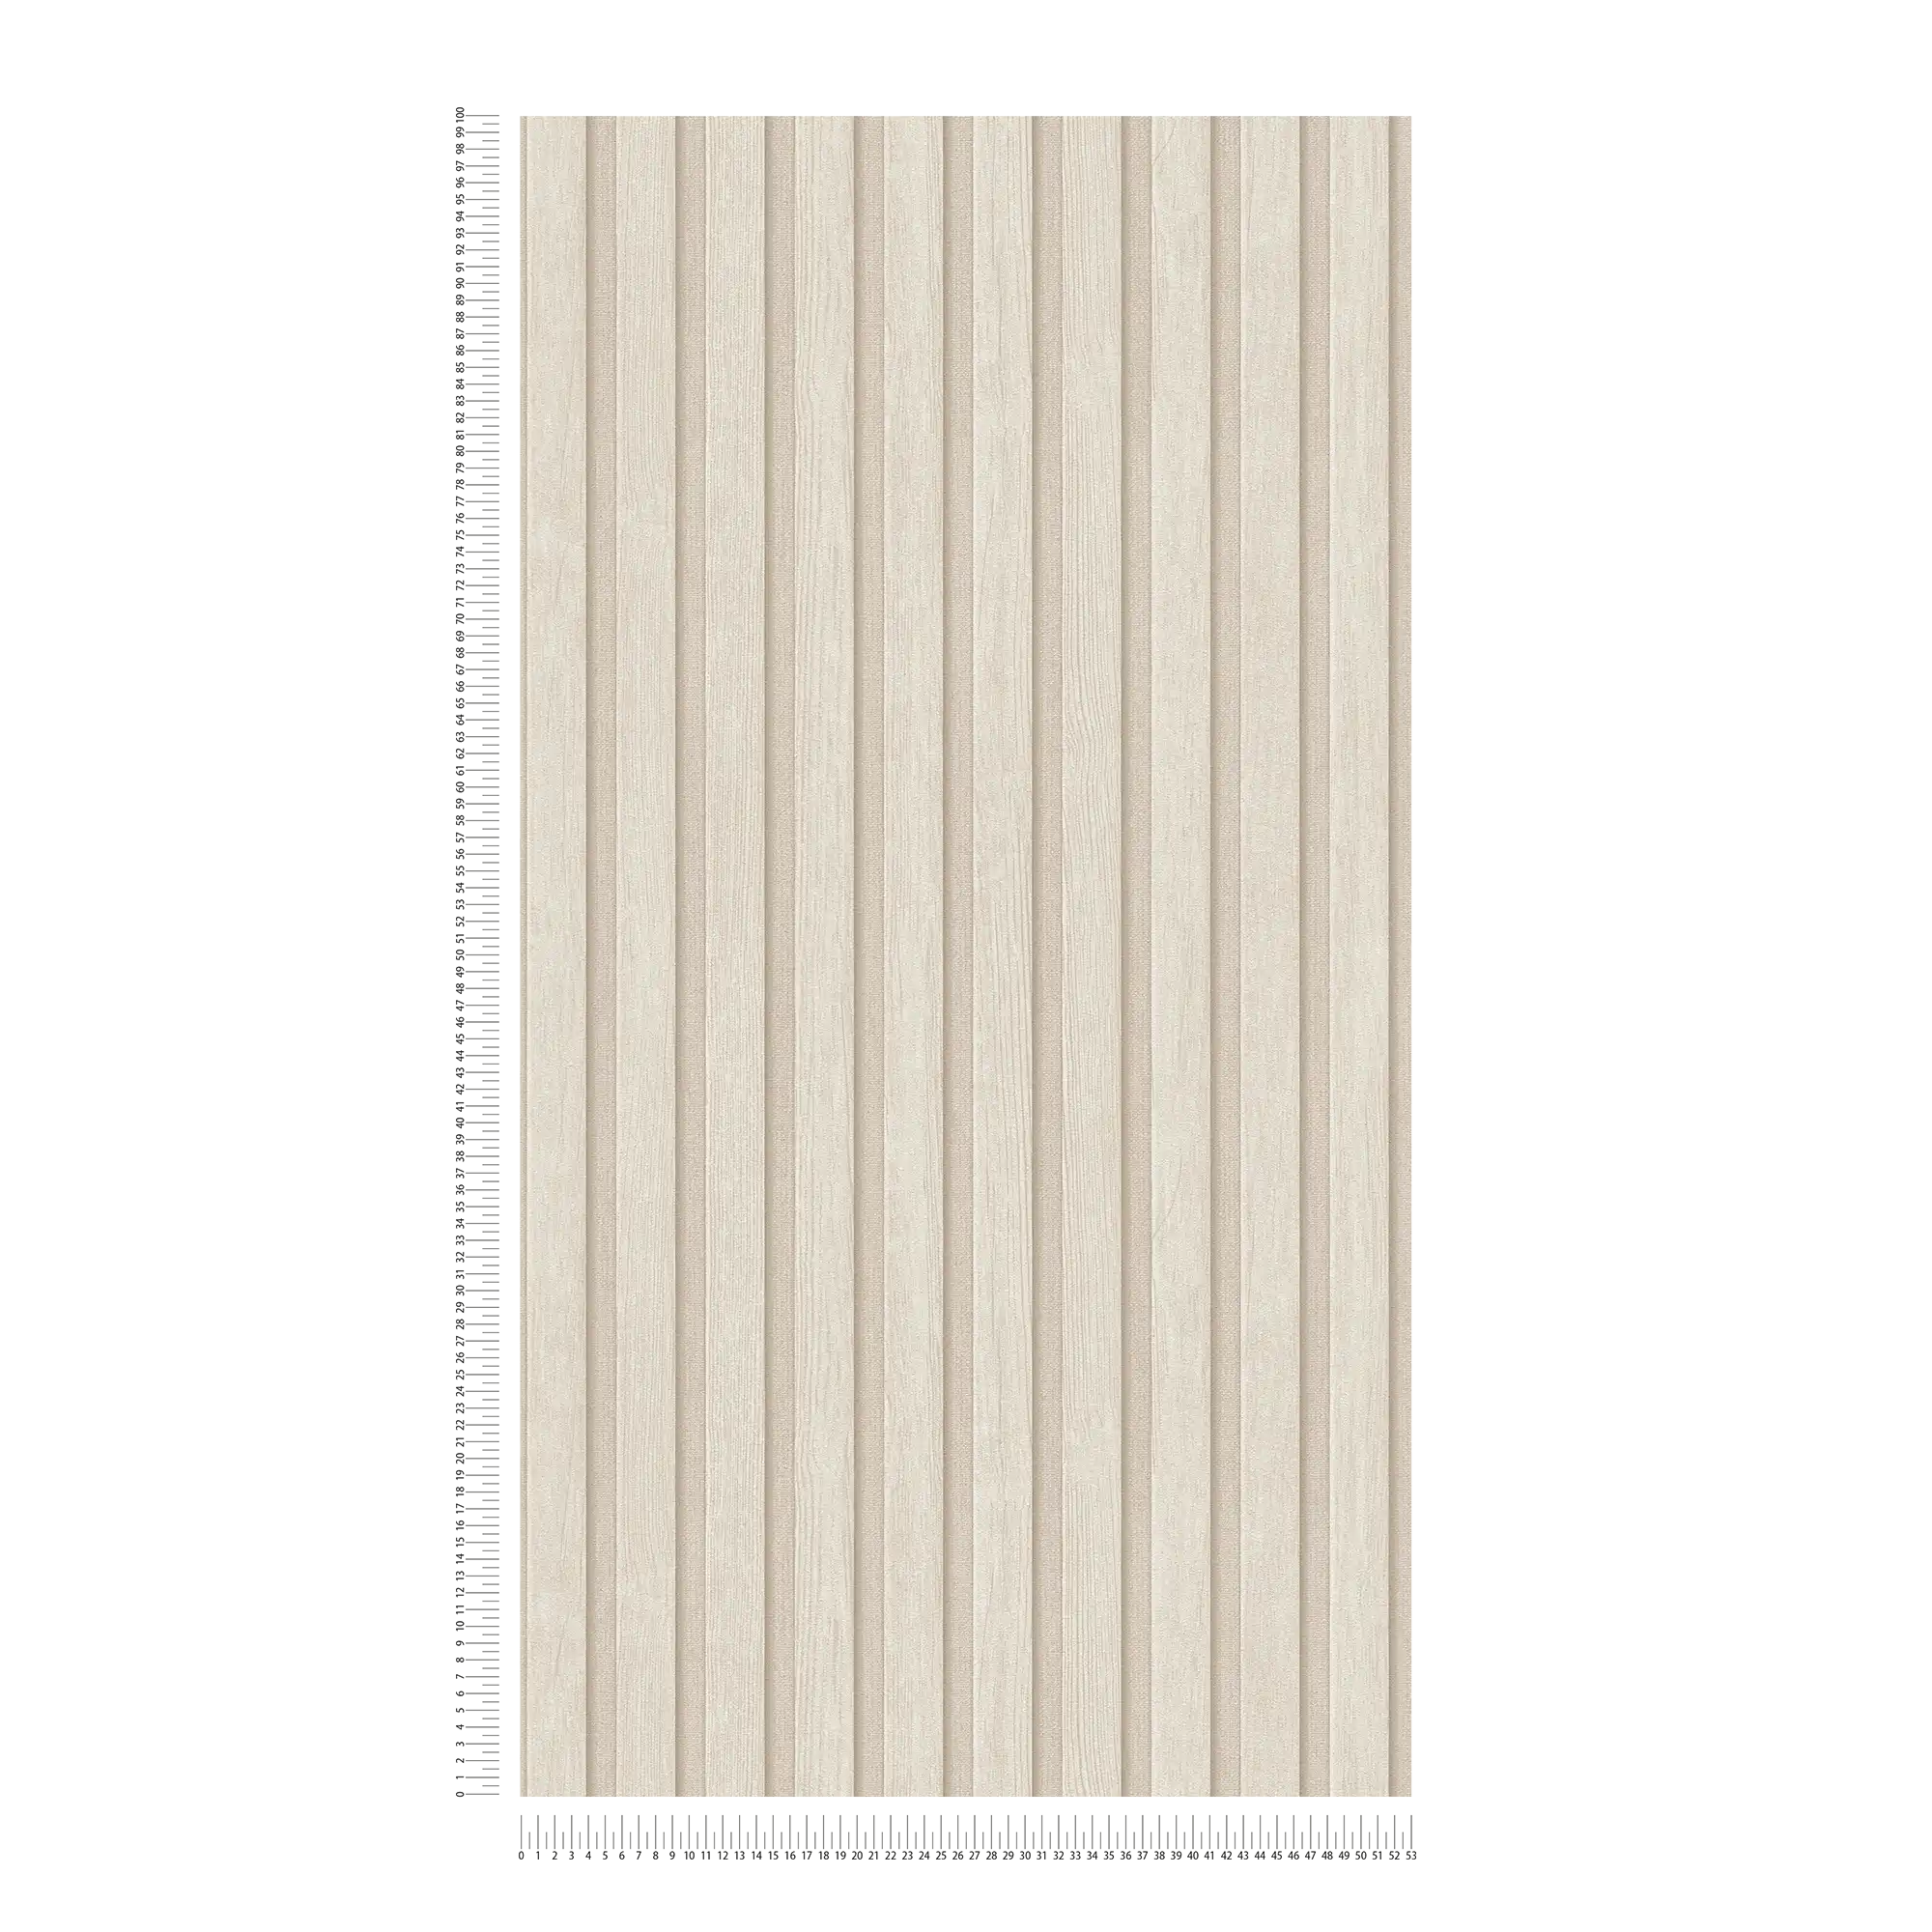             Non-woven wallpaper with wood effect acoustic panel look - cream, beige
        